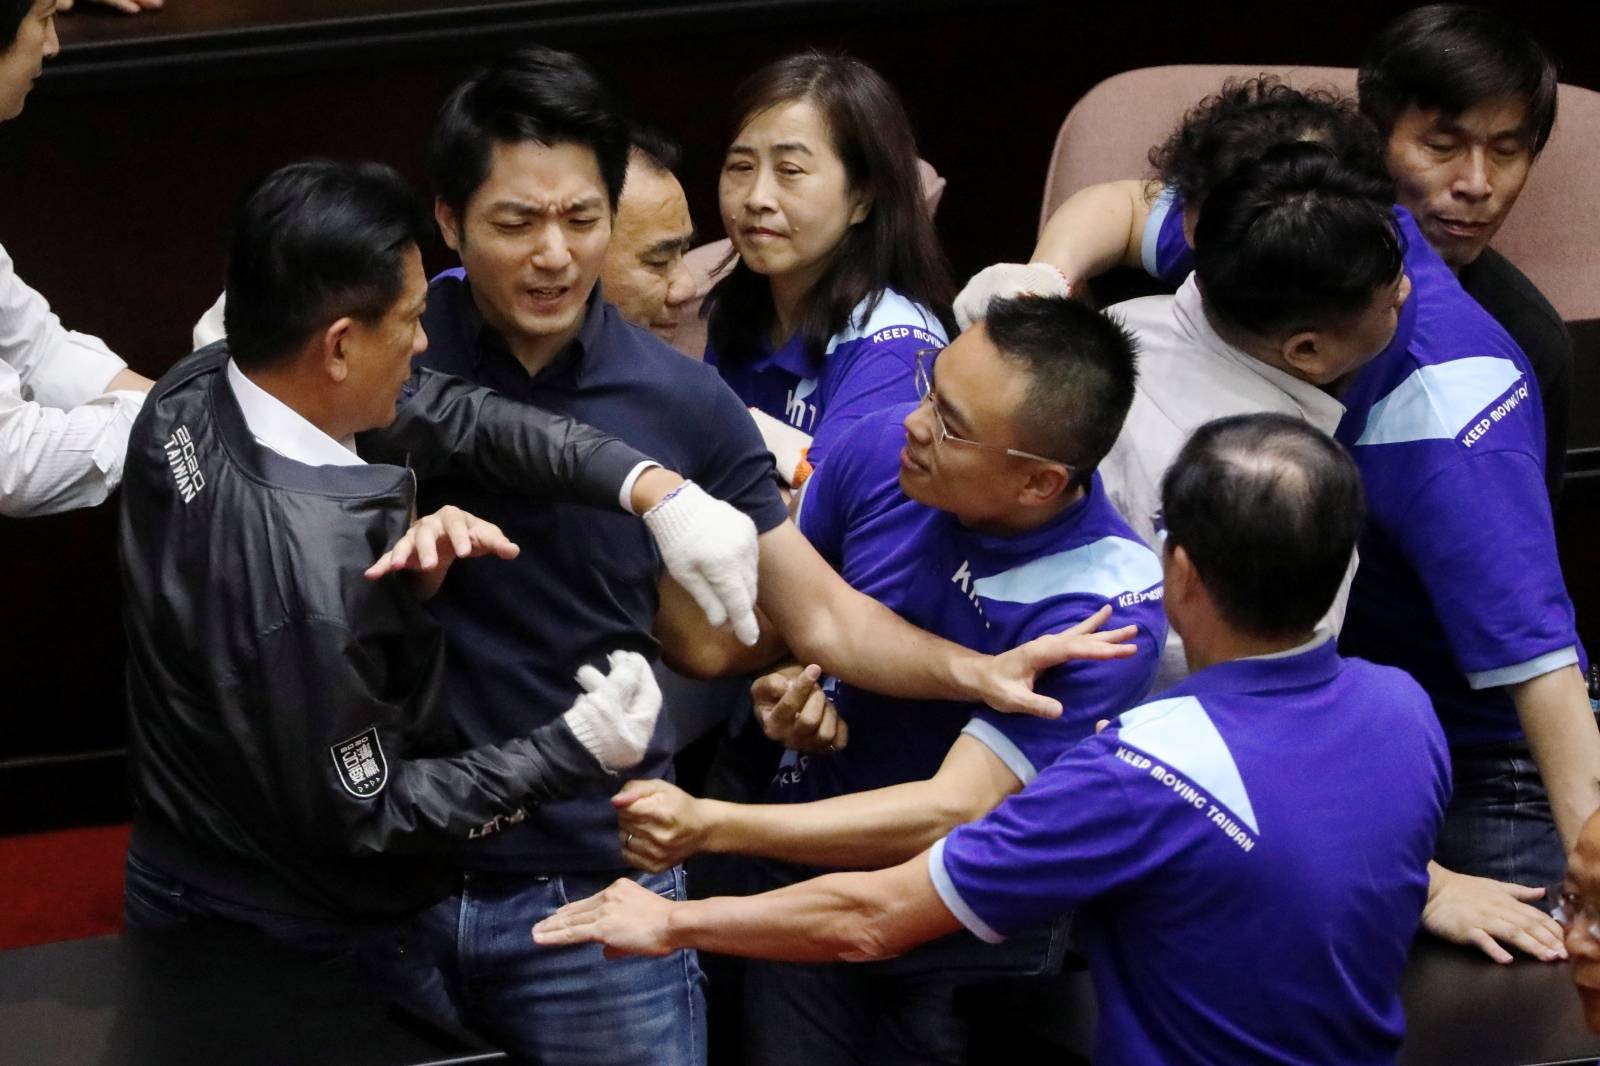 Lawmakers from Taiwan's ruling Democratic Progressive Party (DPP) scuffle with lawmakers from the main opposition Kuomintang (KMT) party, who have been occupying the Legislature Yuan, in Taipei